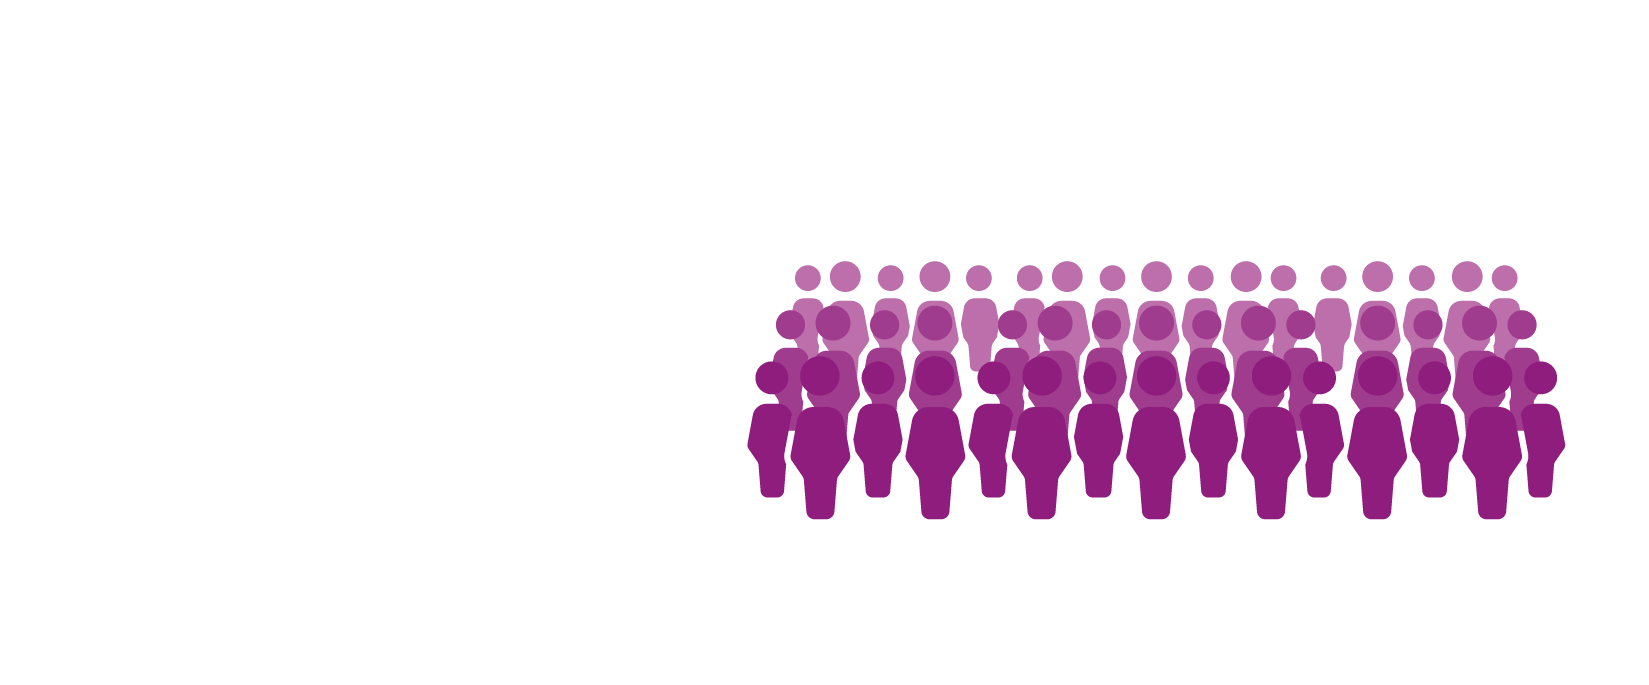 We support 2,000 organisations and over 2.5 million employees